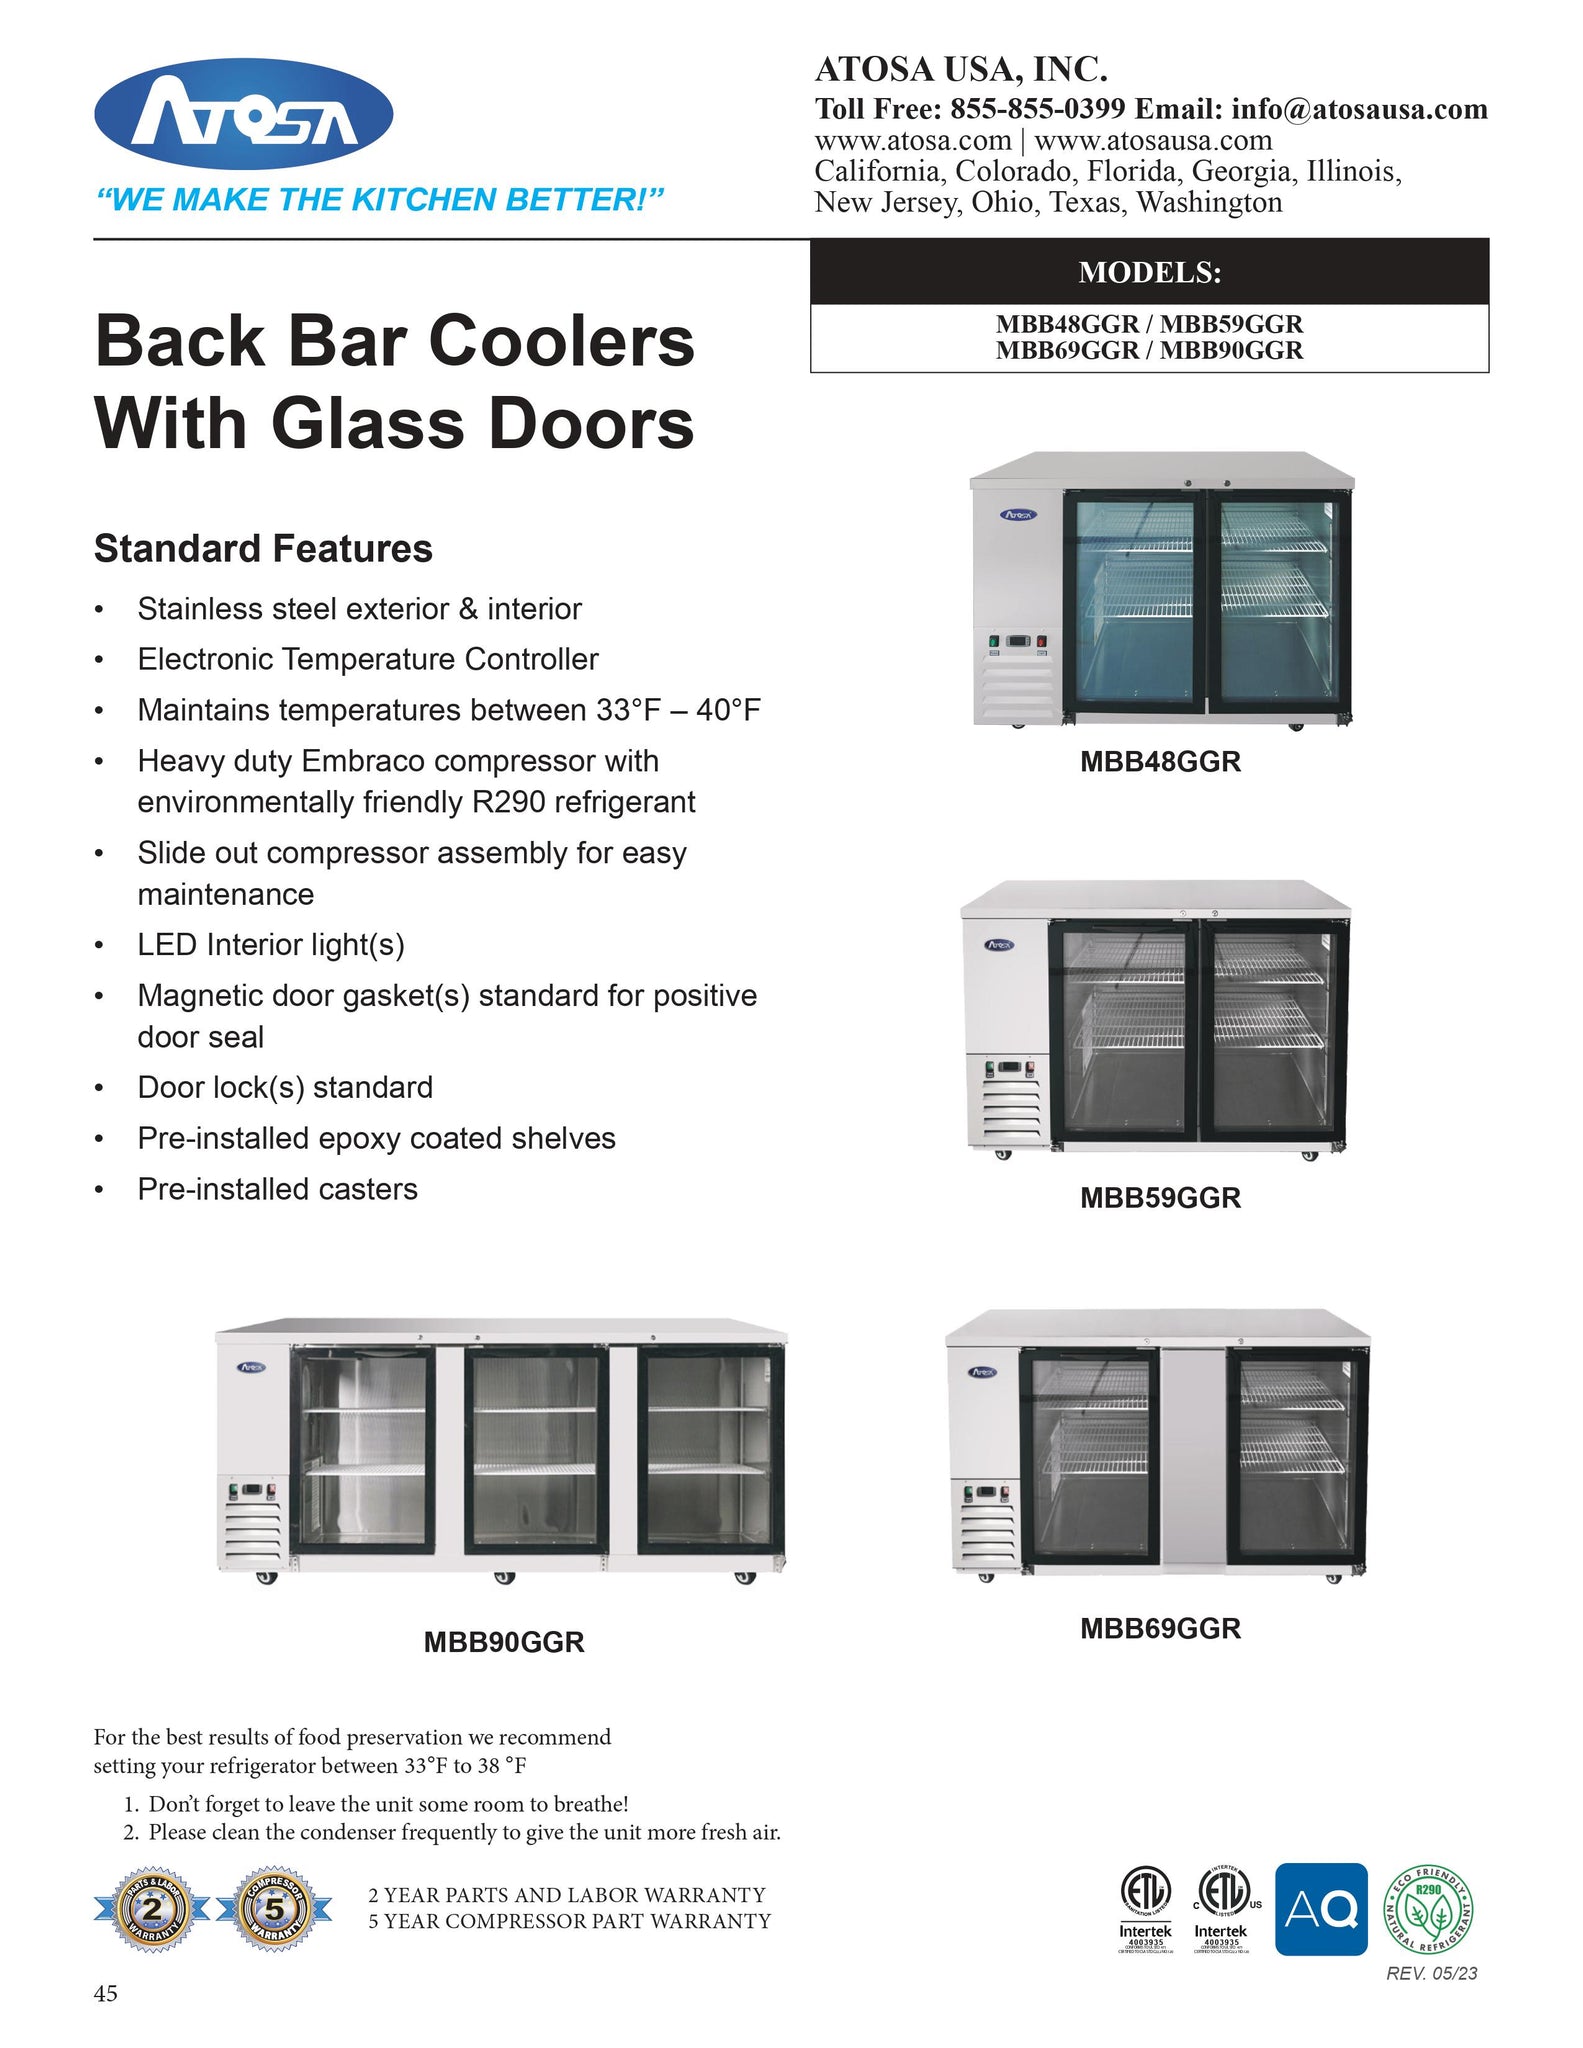 Atosa MBB48GGR 48" Stainless Steel Two Section Glass Door Back Bar Cooler